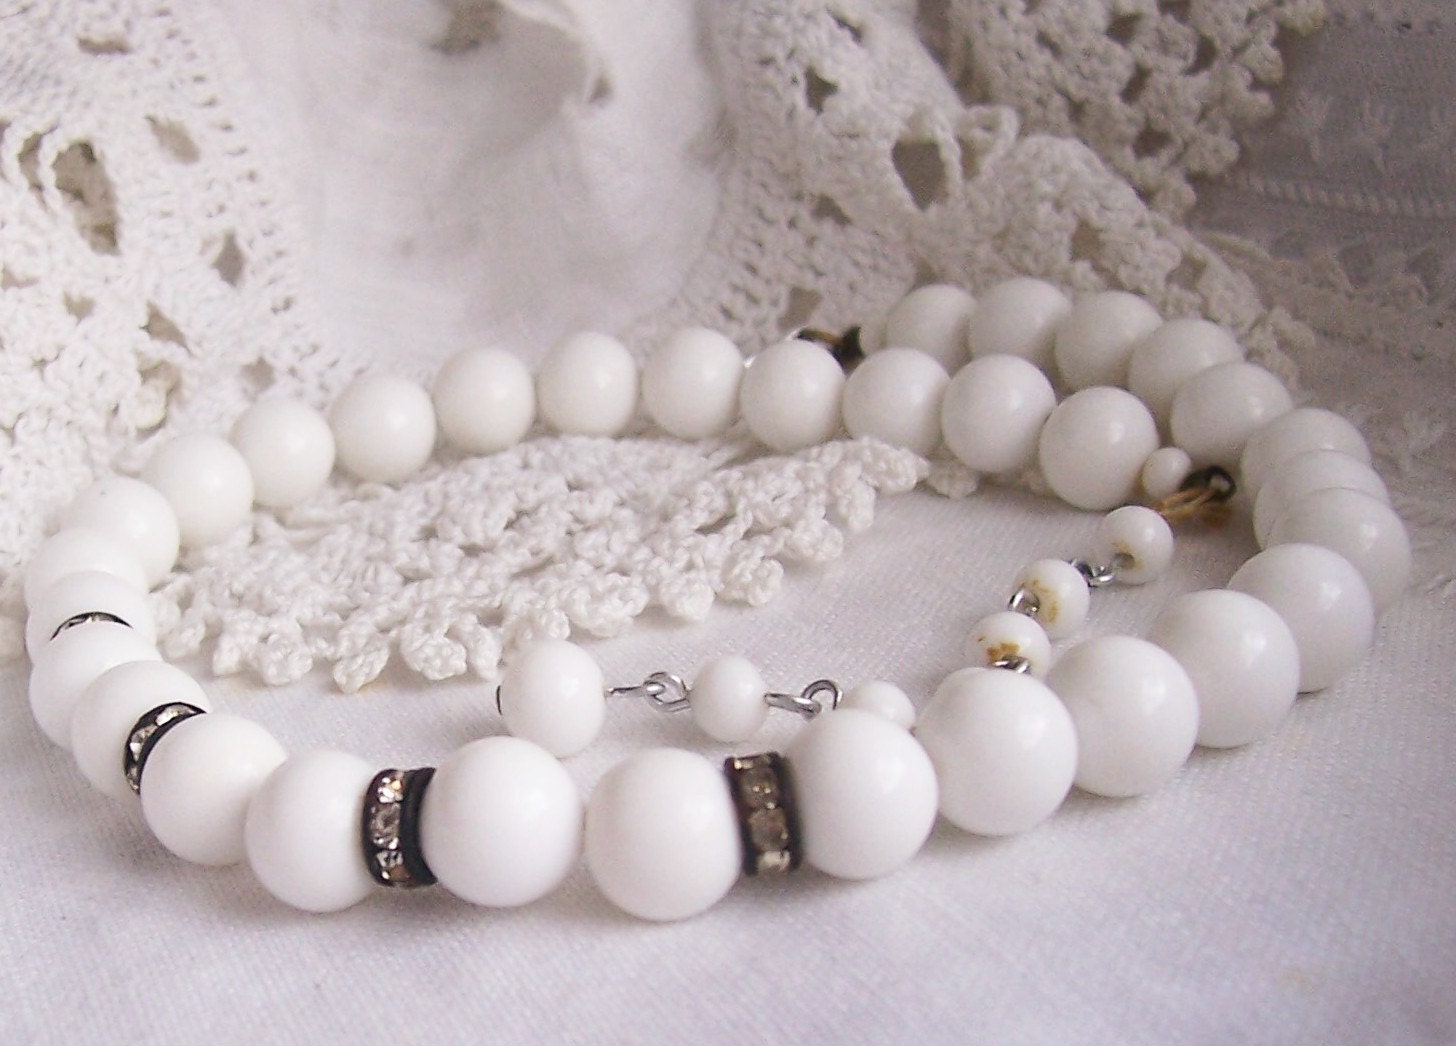 RESERVED - divapixie - Milky Rounds with a Wink - Vintage Milkglass and Rhinestone Necklace for Rescue or Bead Harvest